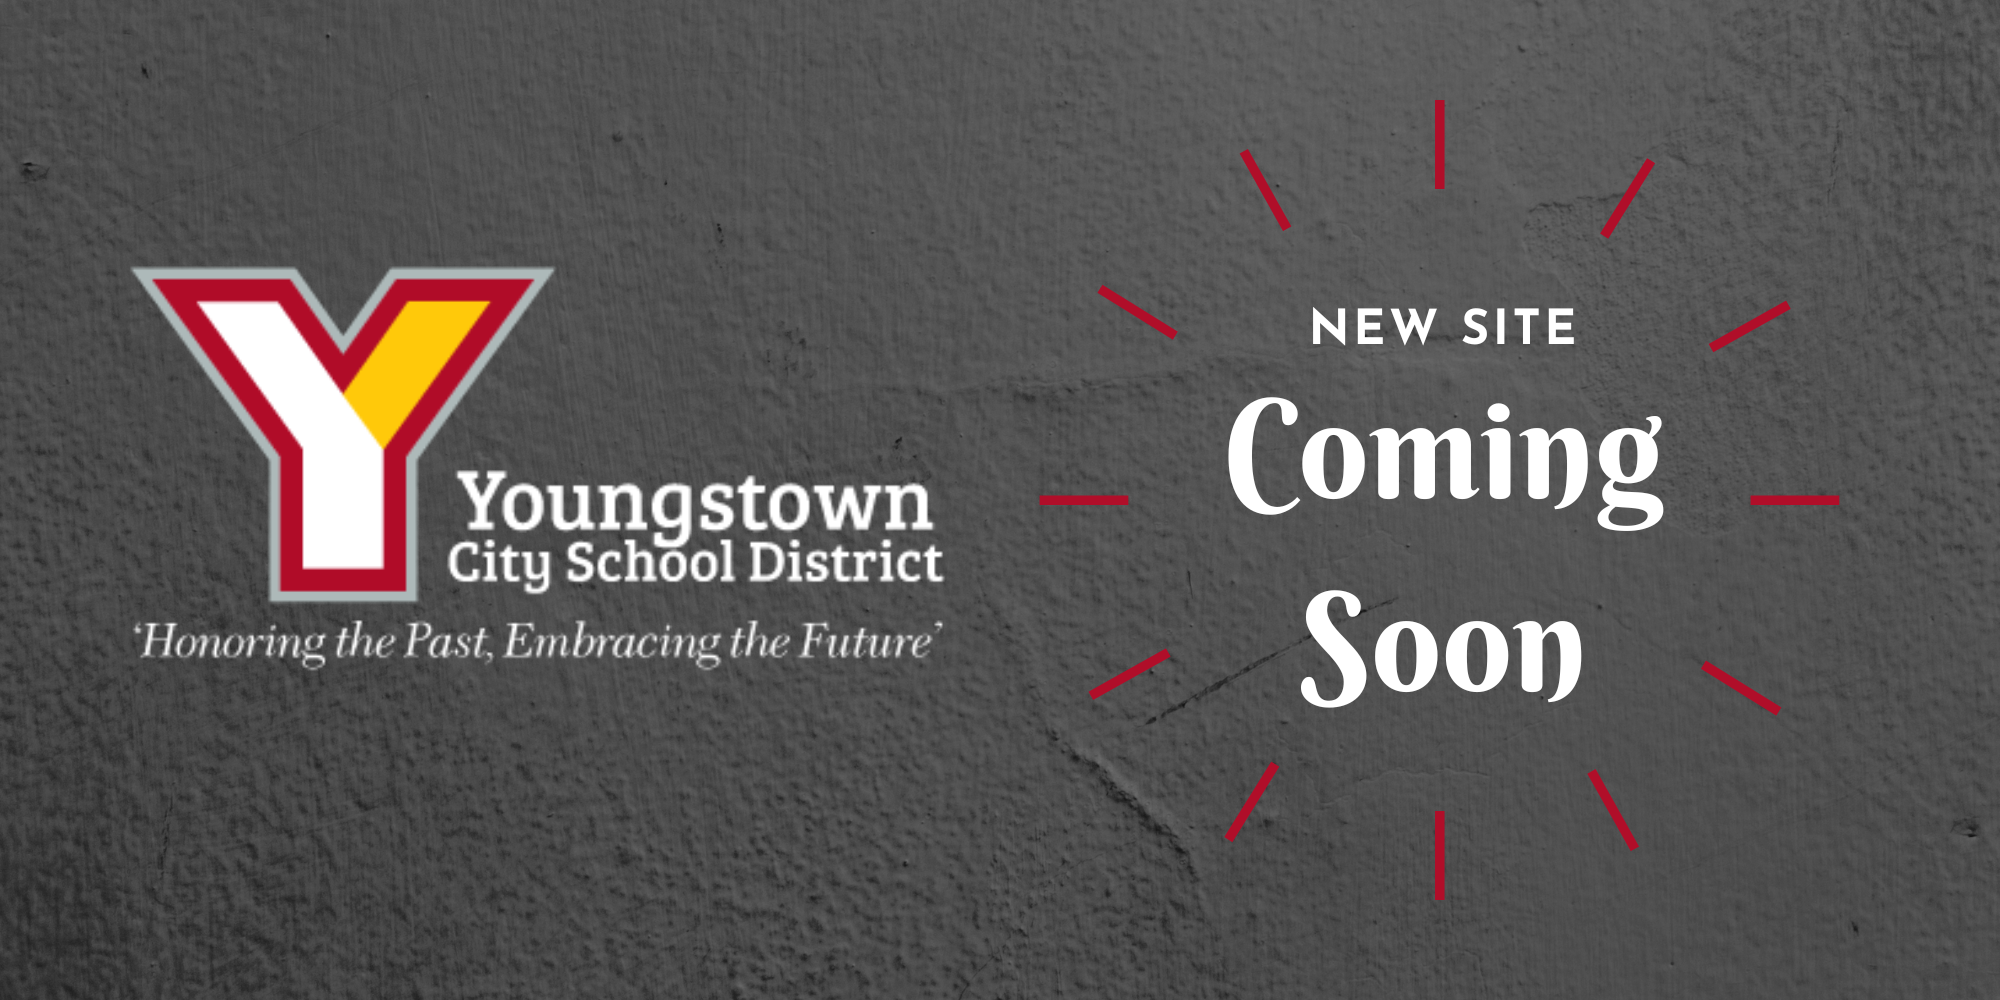 Youngstown City Schools New Site Coming Soon